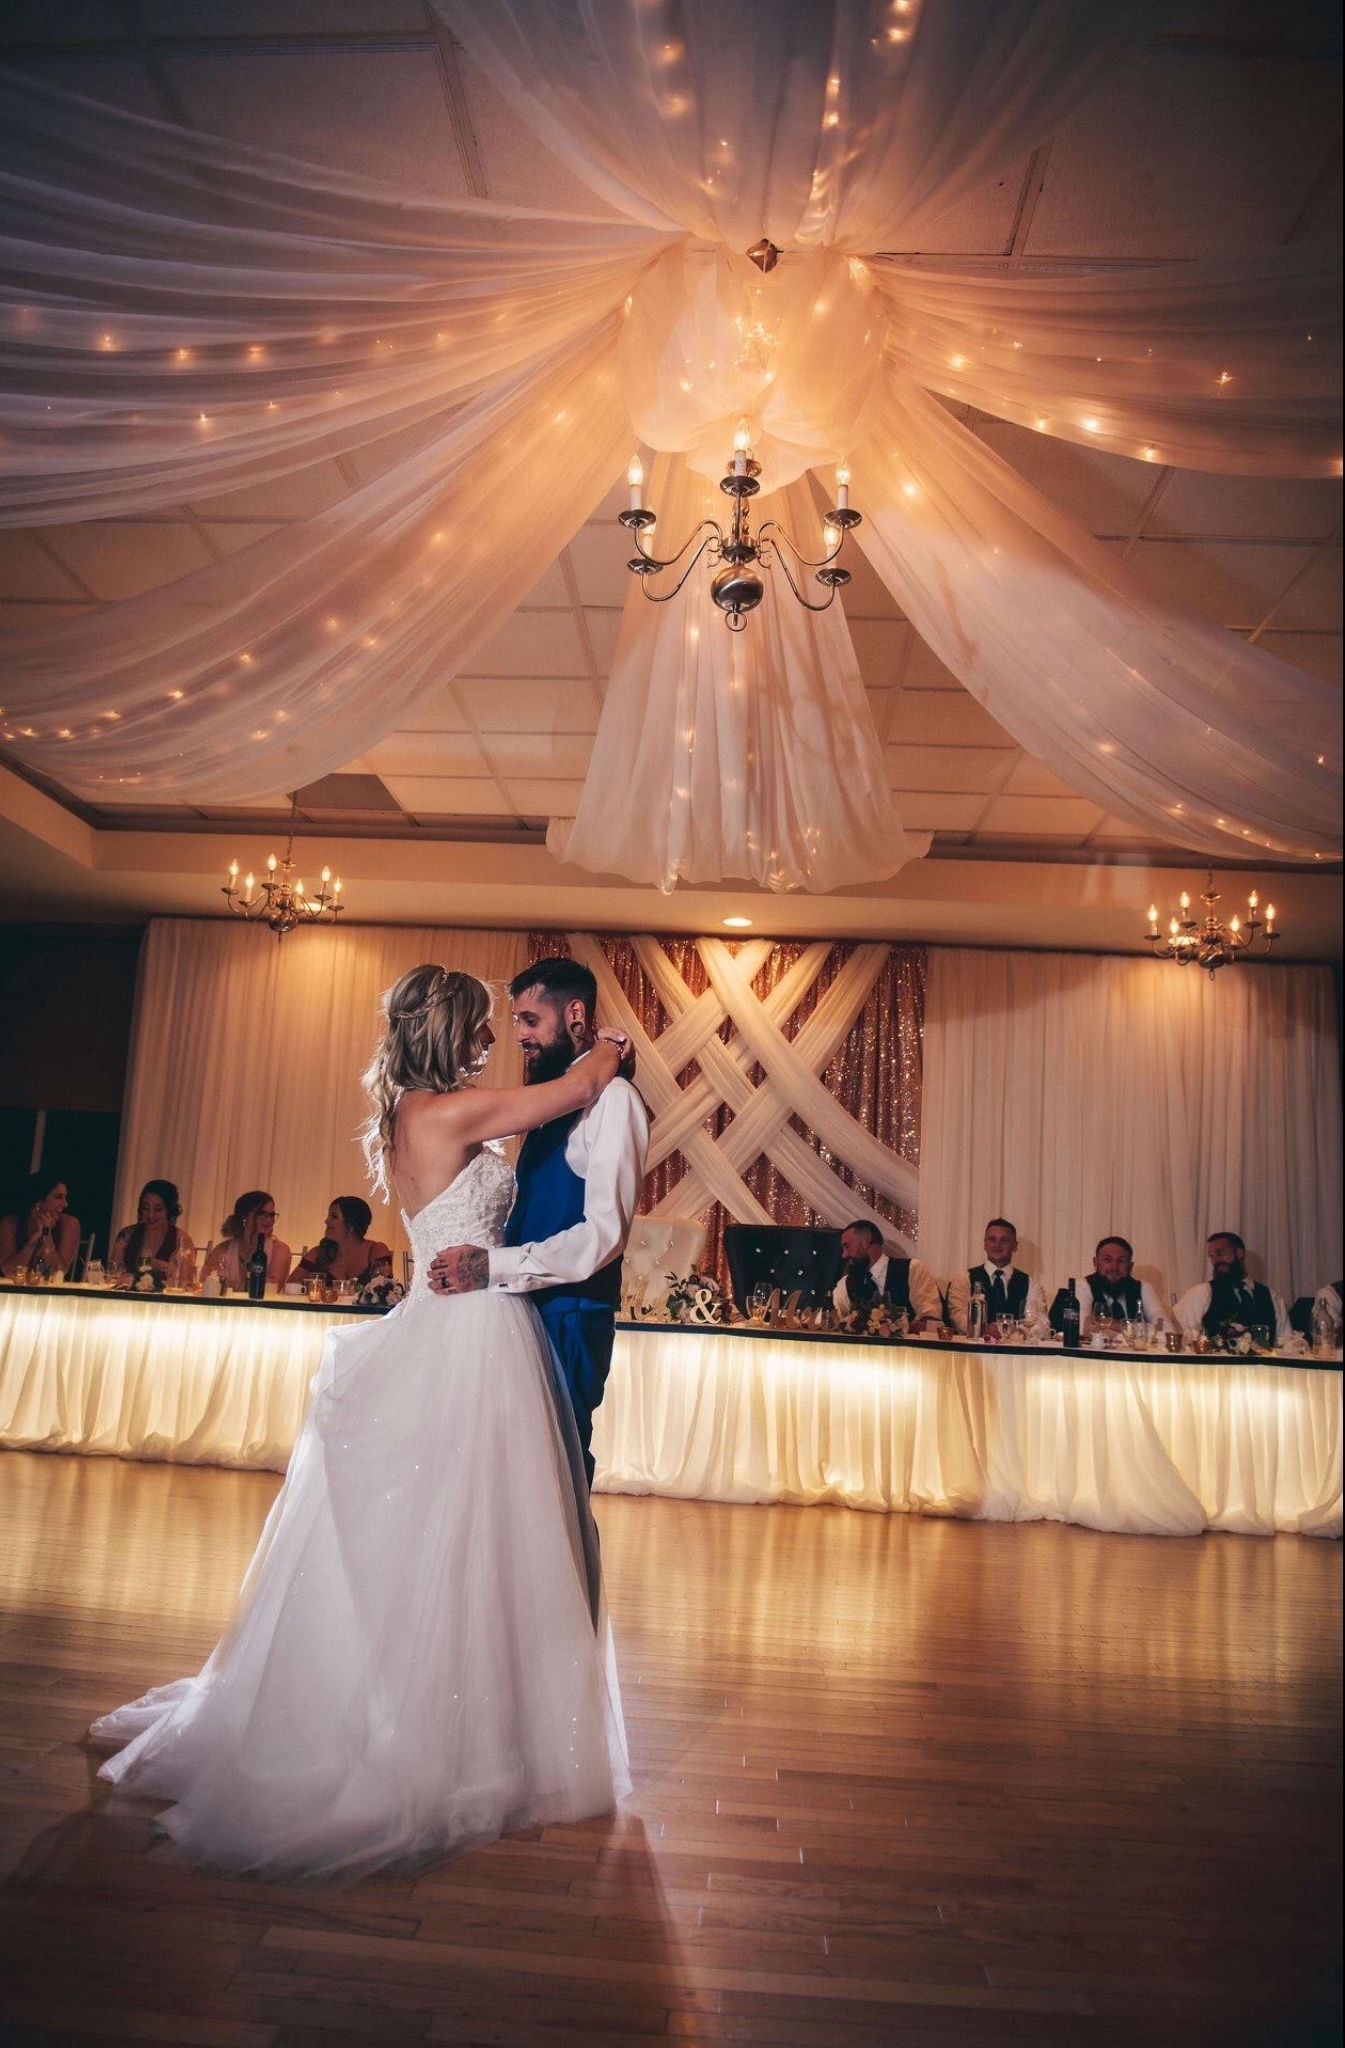 Bride and groom dancing on the dancefloor surrounded by gorgeous wedding decor.